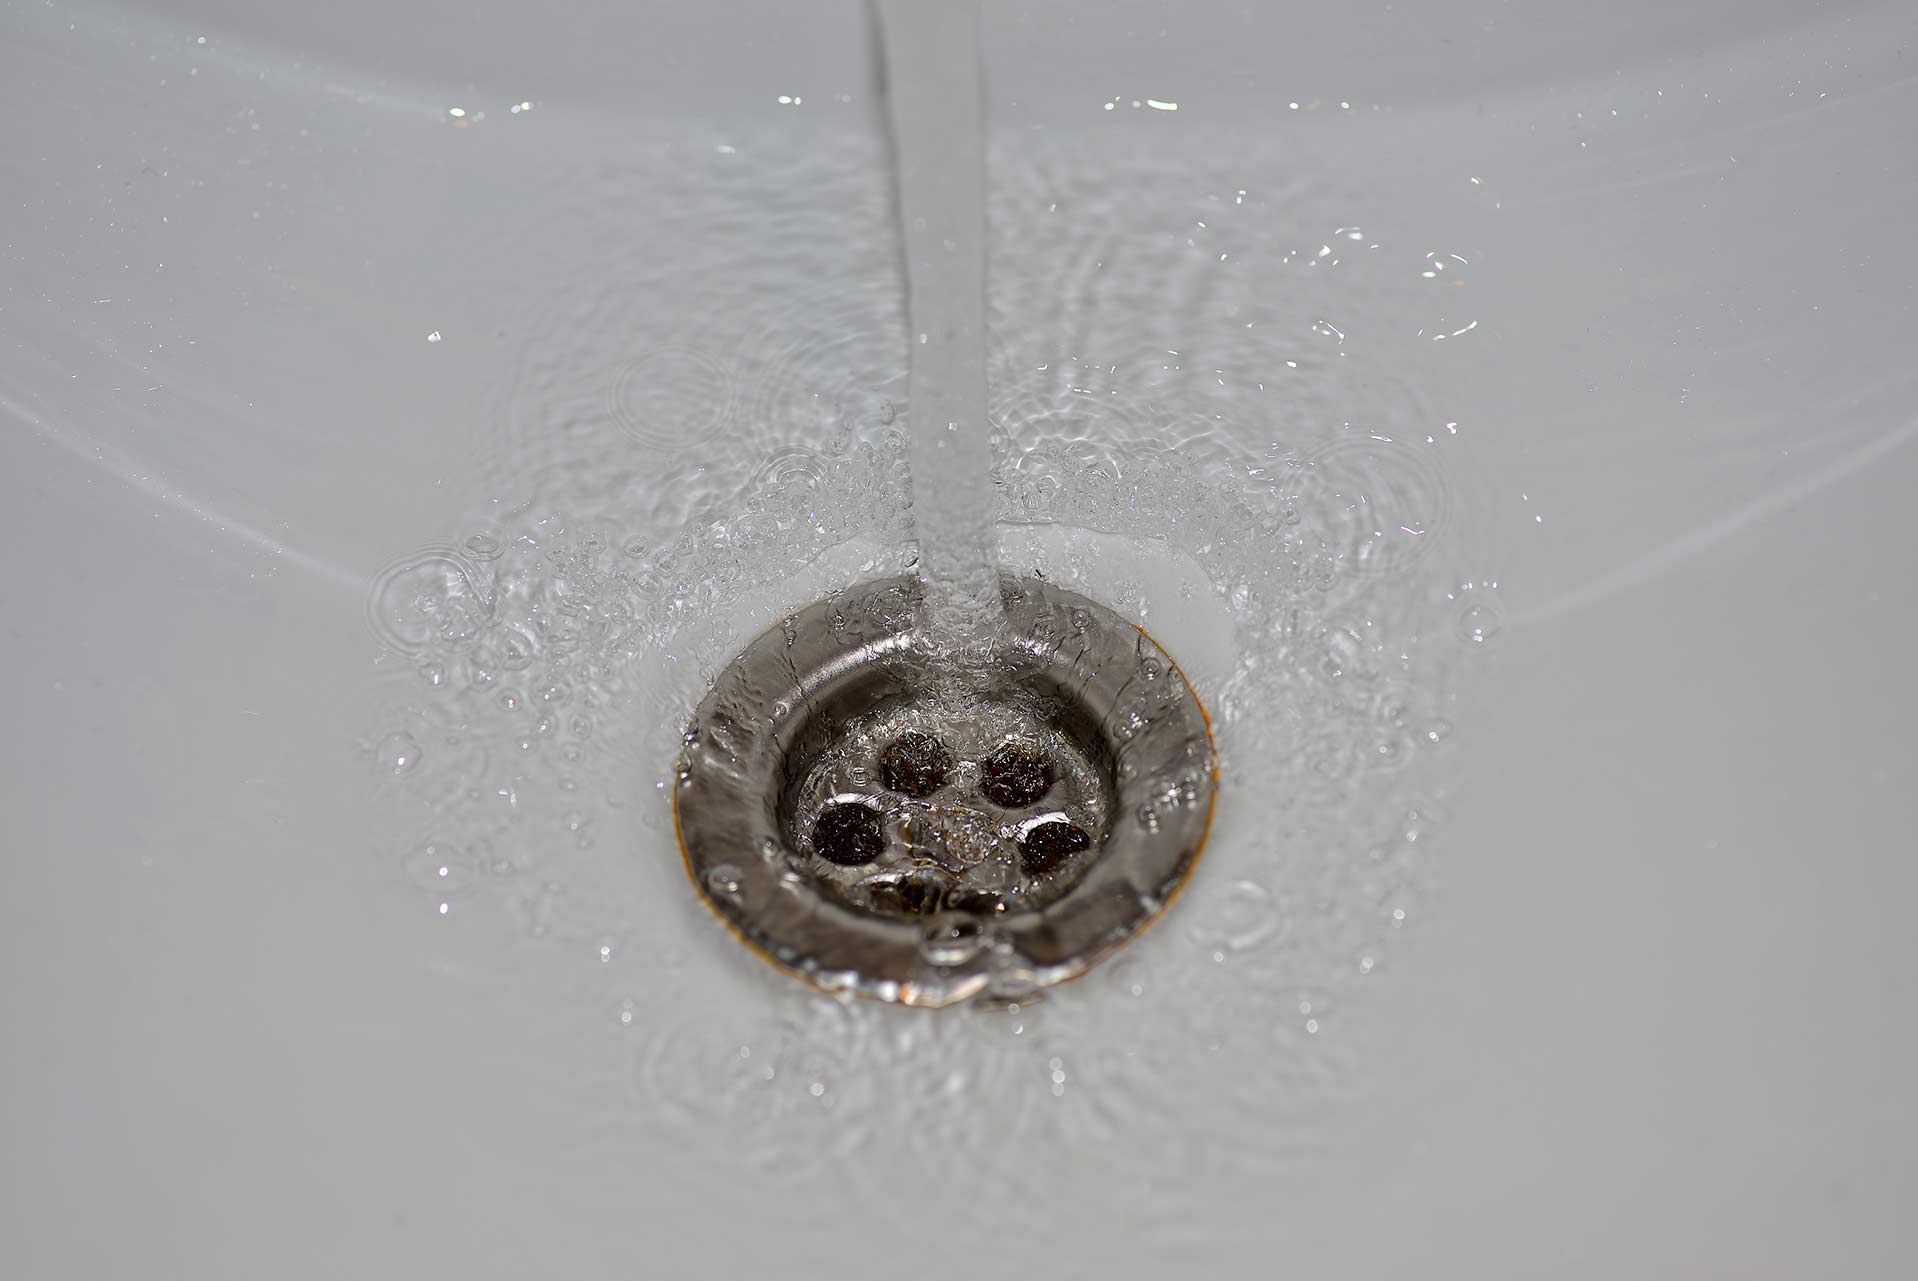 A2B Drains provides services to unblock blocked sinks and drains for properties in Wisbech.